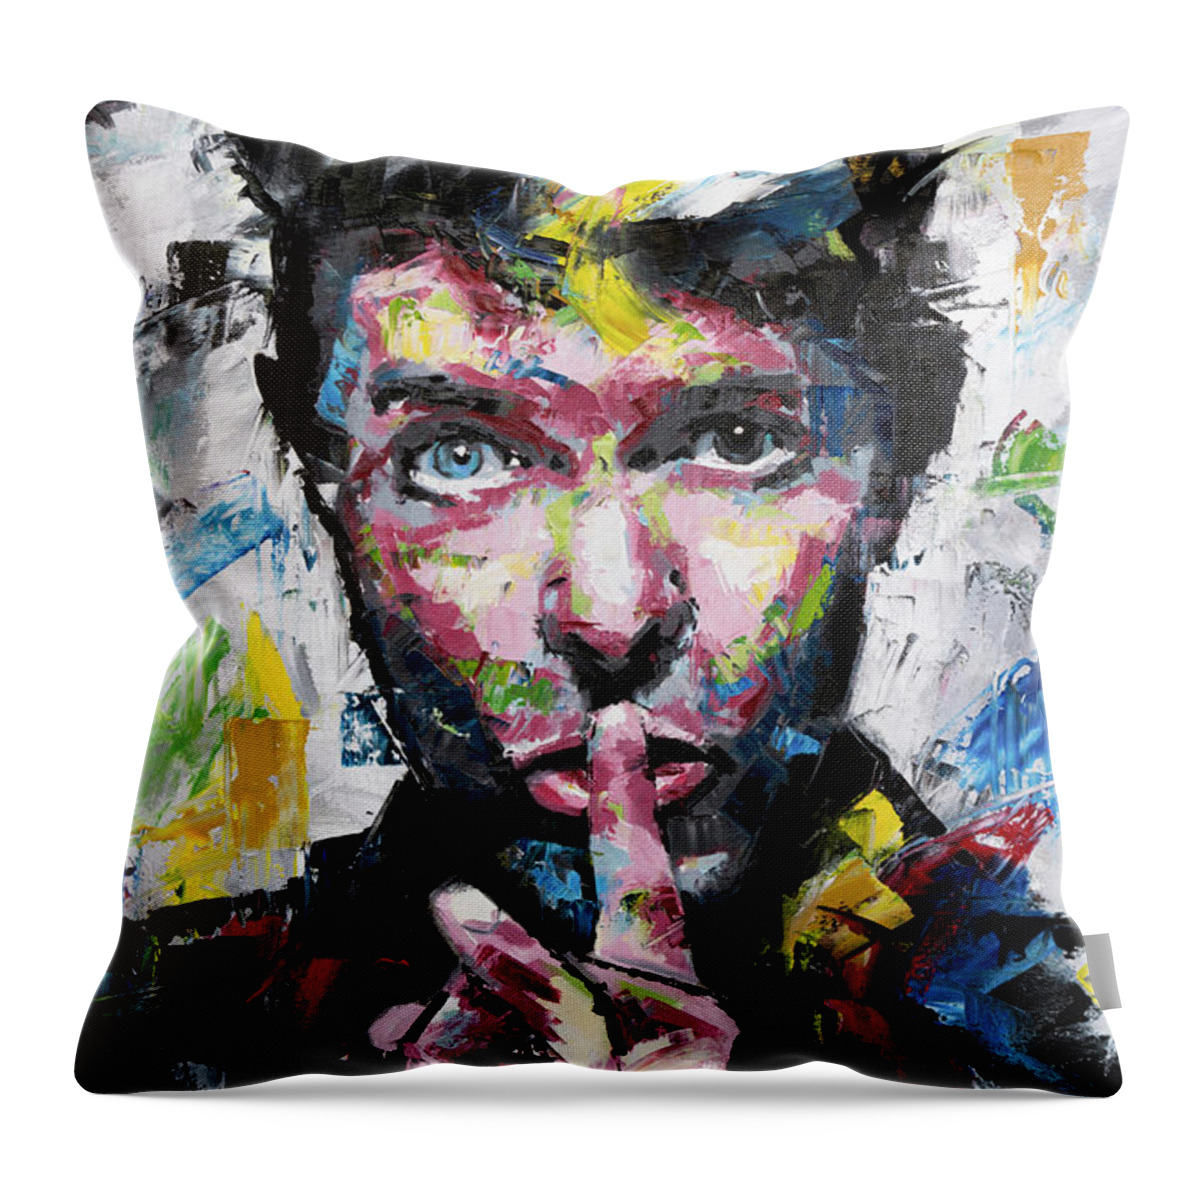 David Bowie Throw Pillow featuring the painting David Bowie Shh by Richard Day